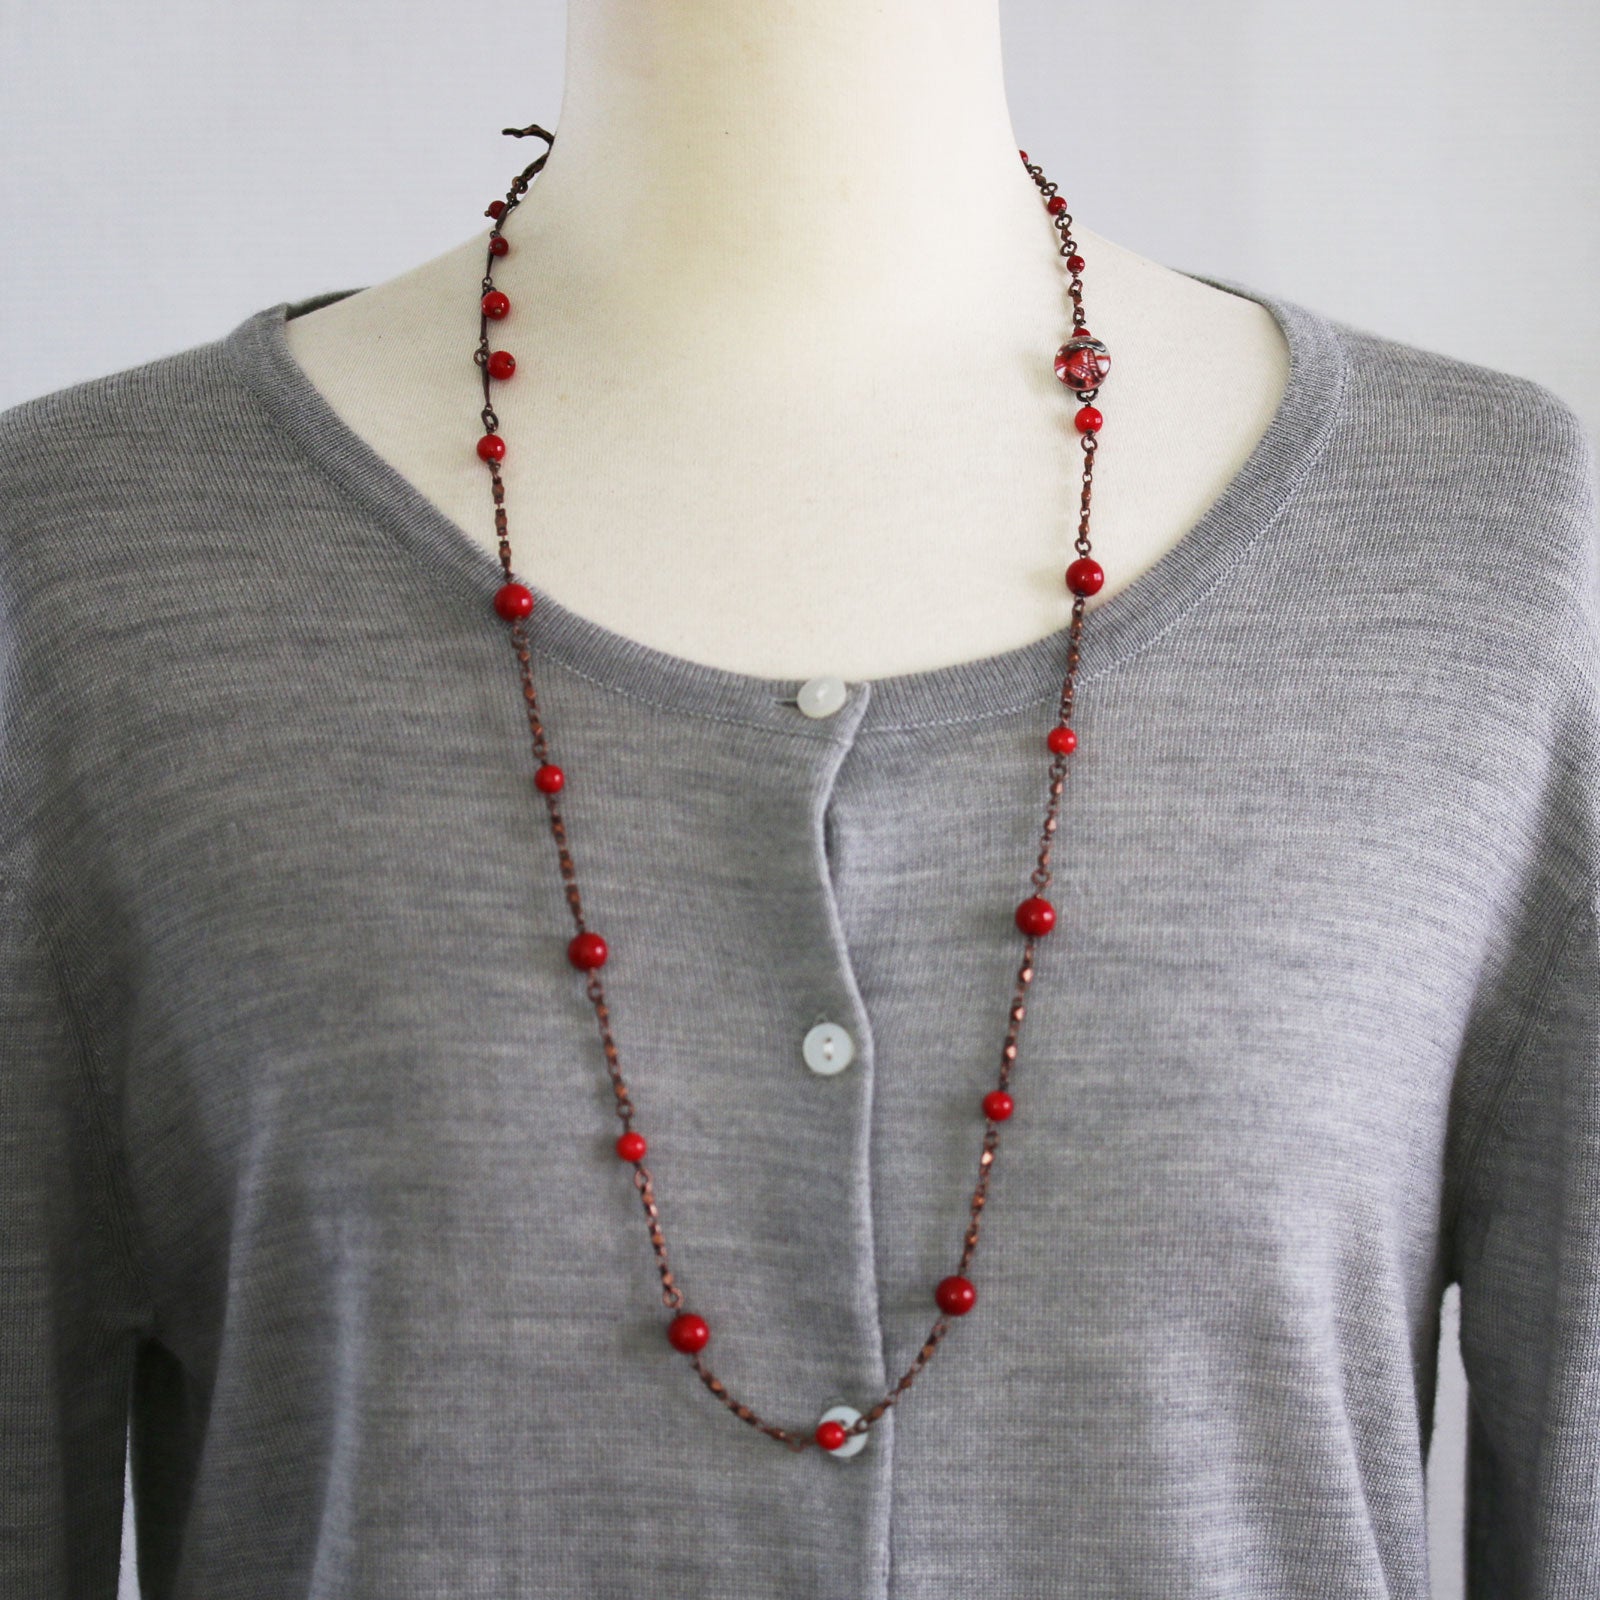 Eyeglasses Chain Necklace Coral Red Lily TAMARUSAN